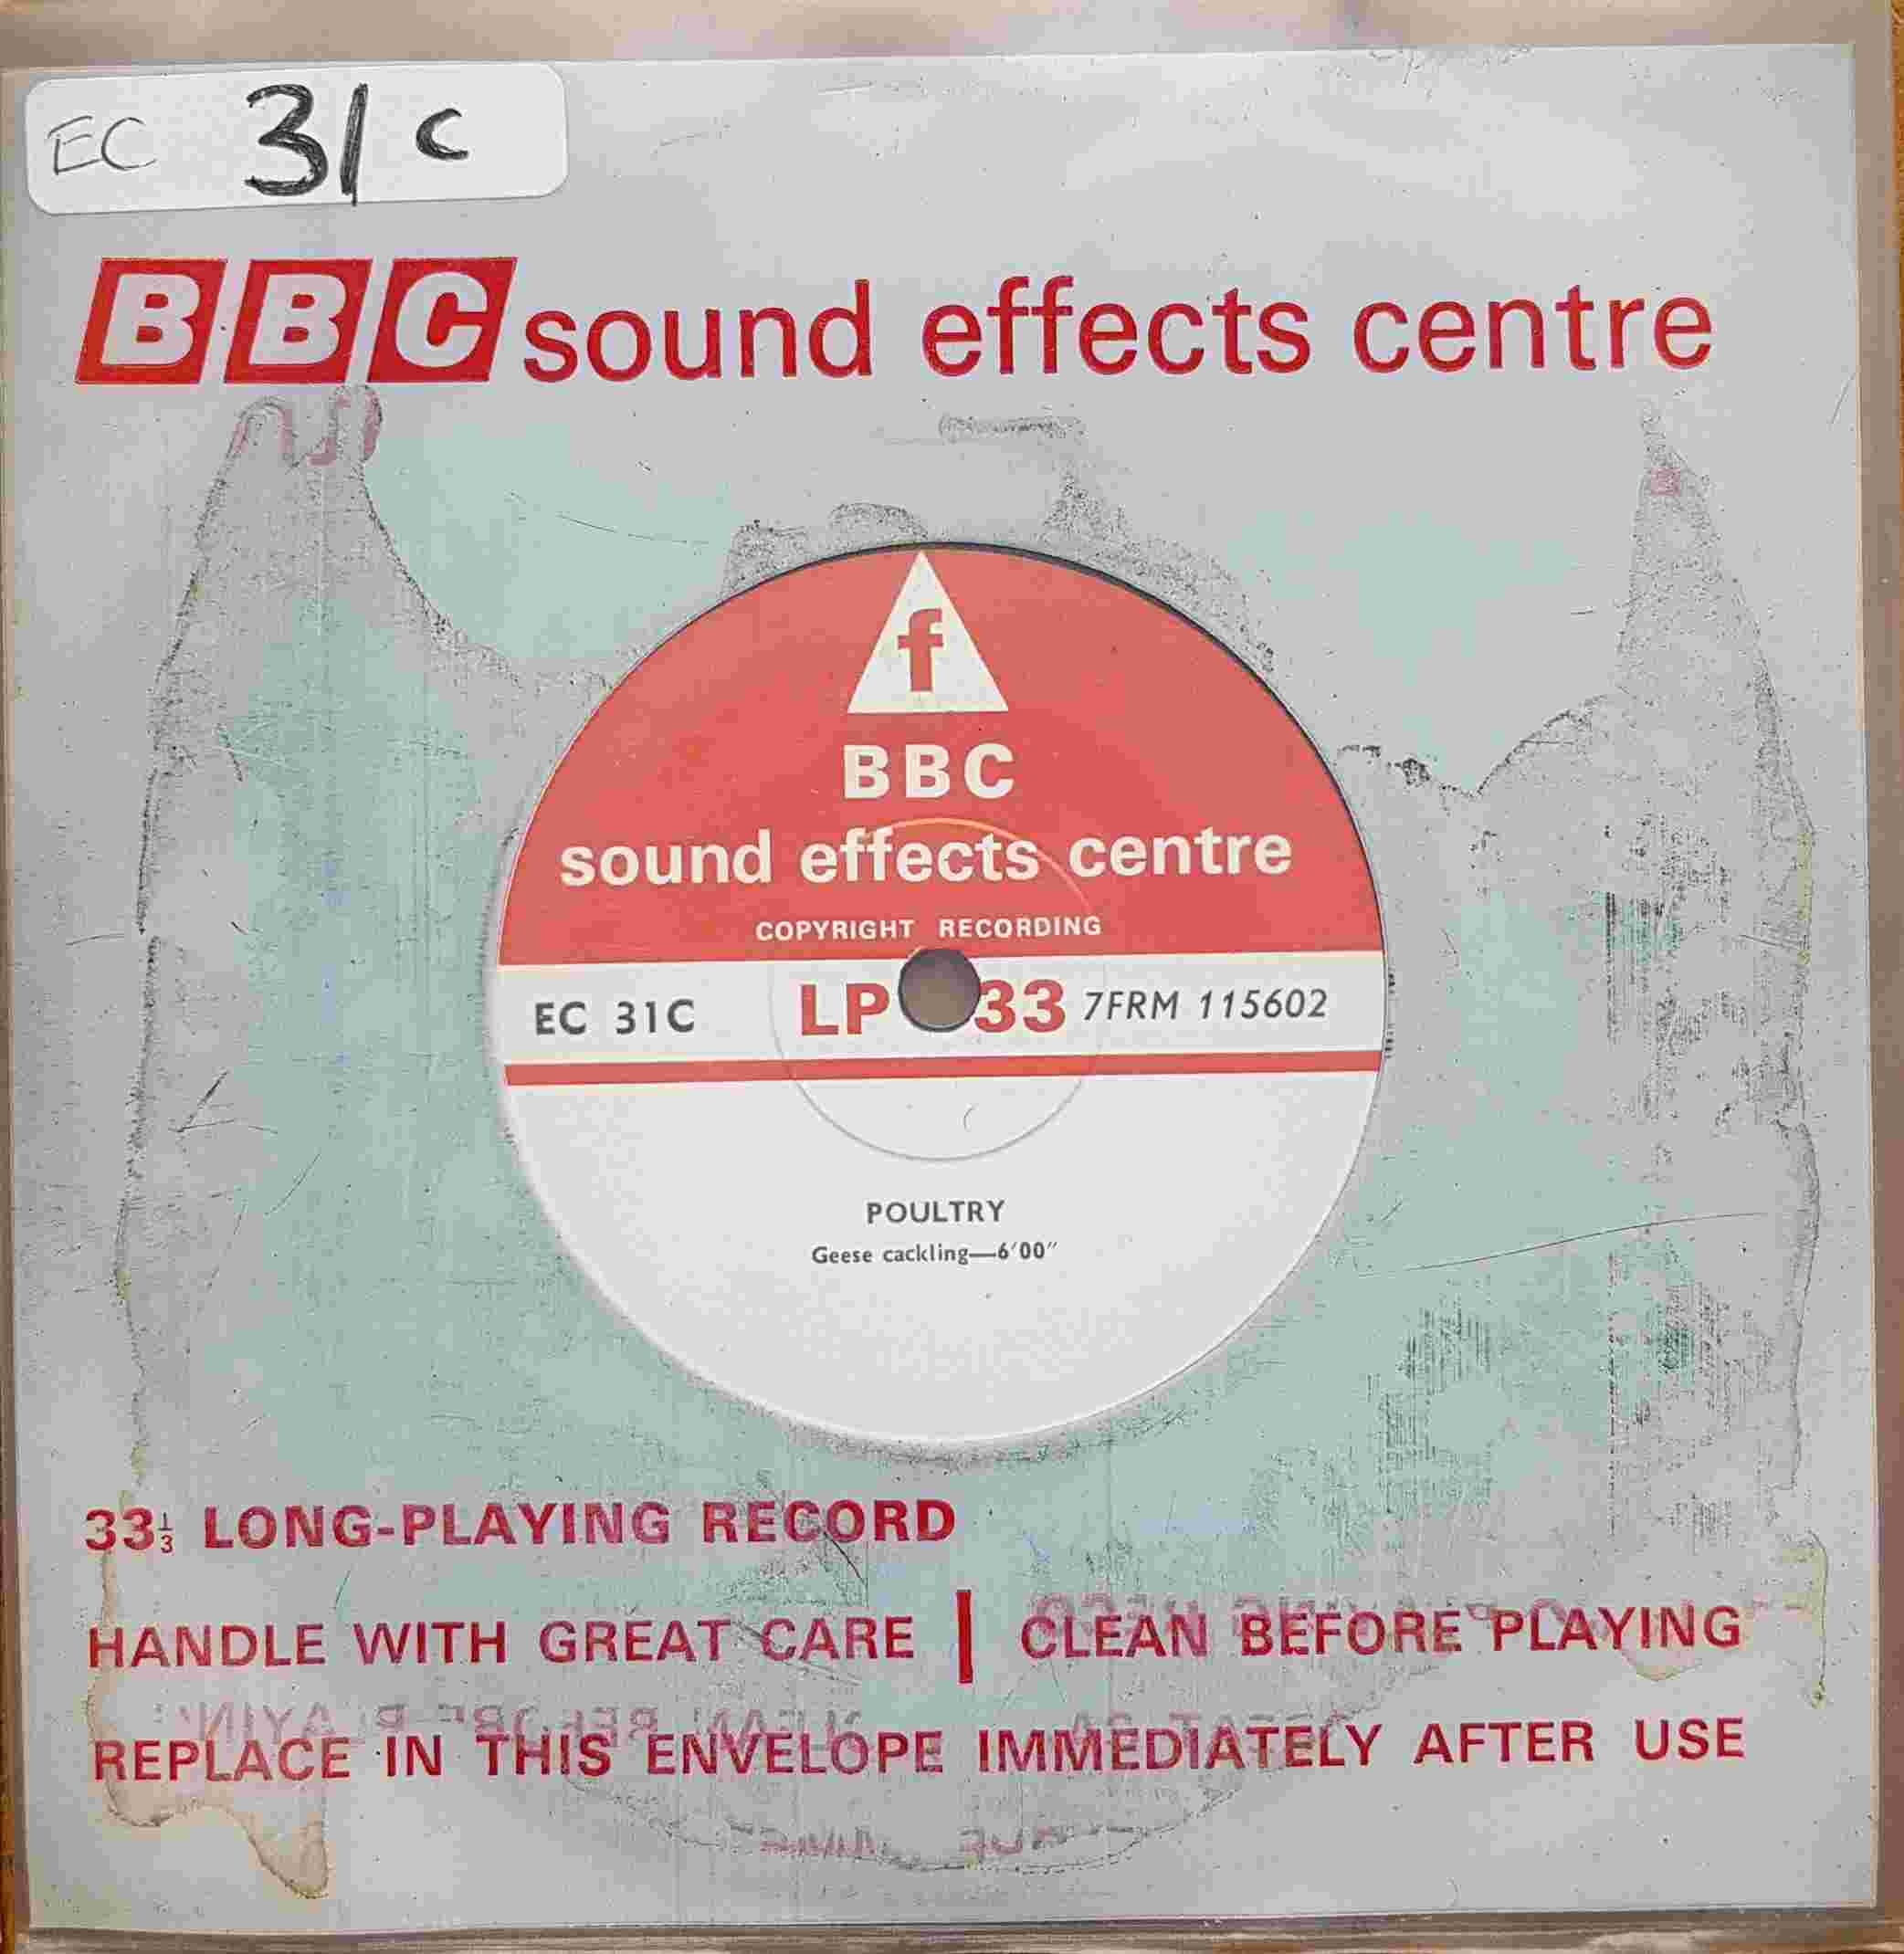 Picture of EC 31C Poultry by artist Not registered from the BBC records and Tapes library